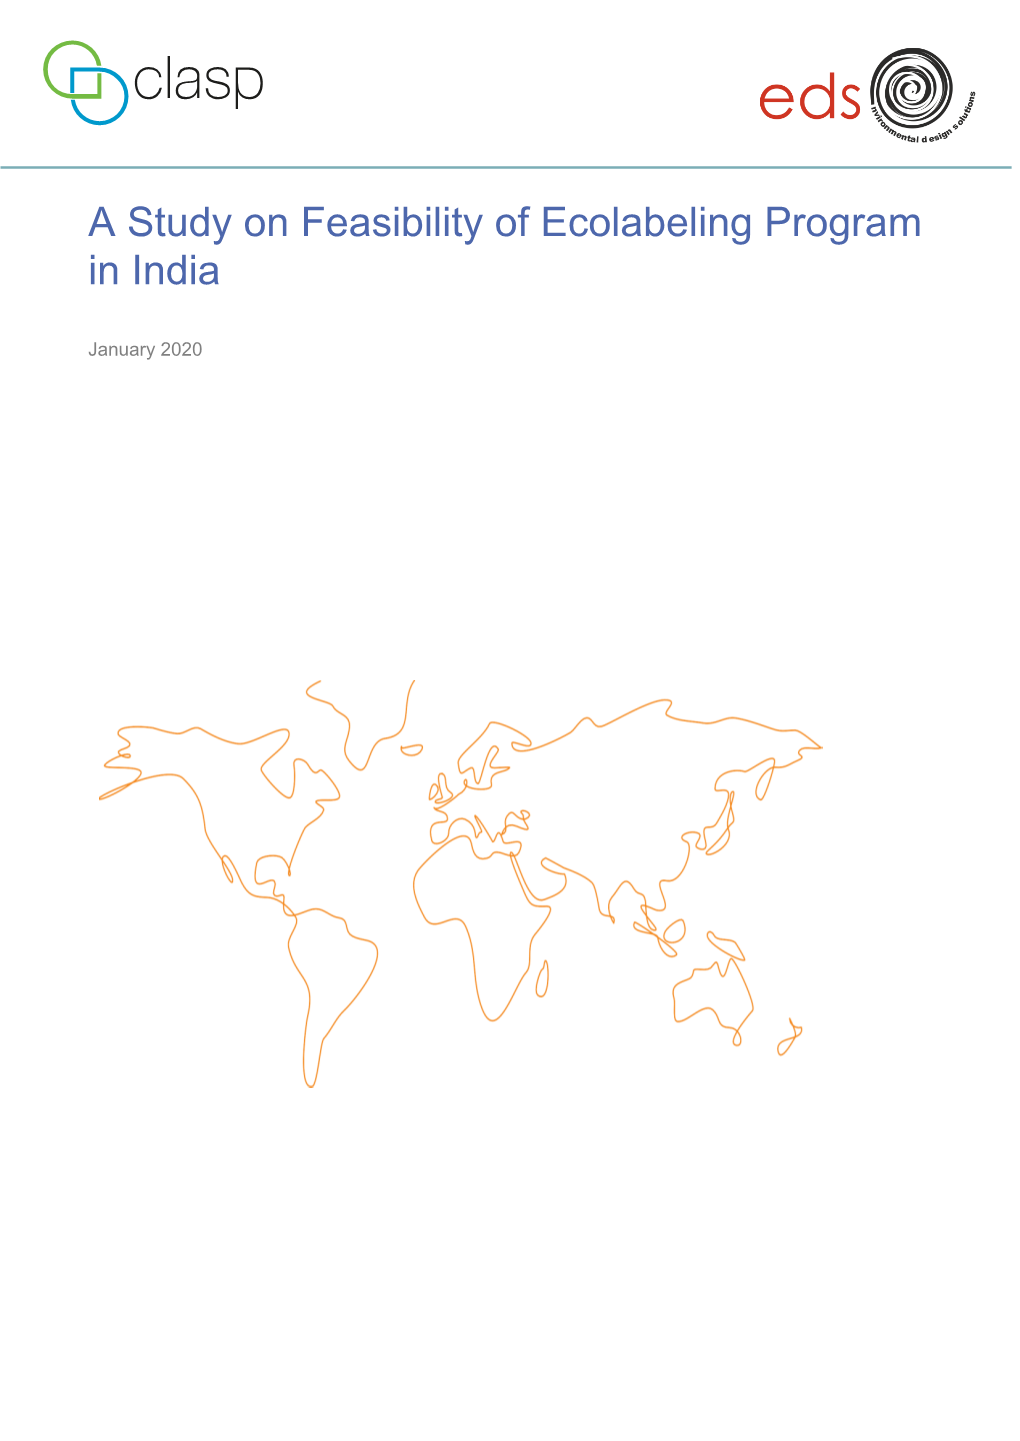 A Study on Feasibility of Ecolabeling Program in India